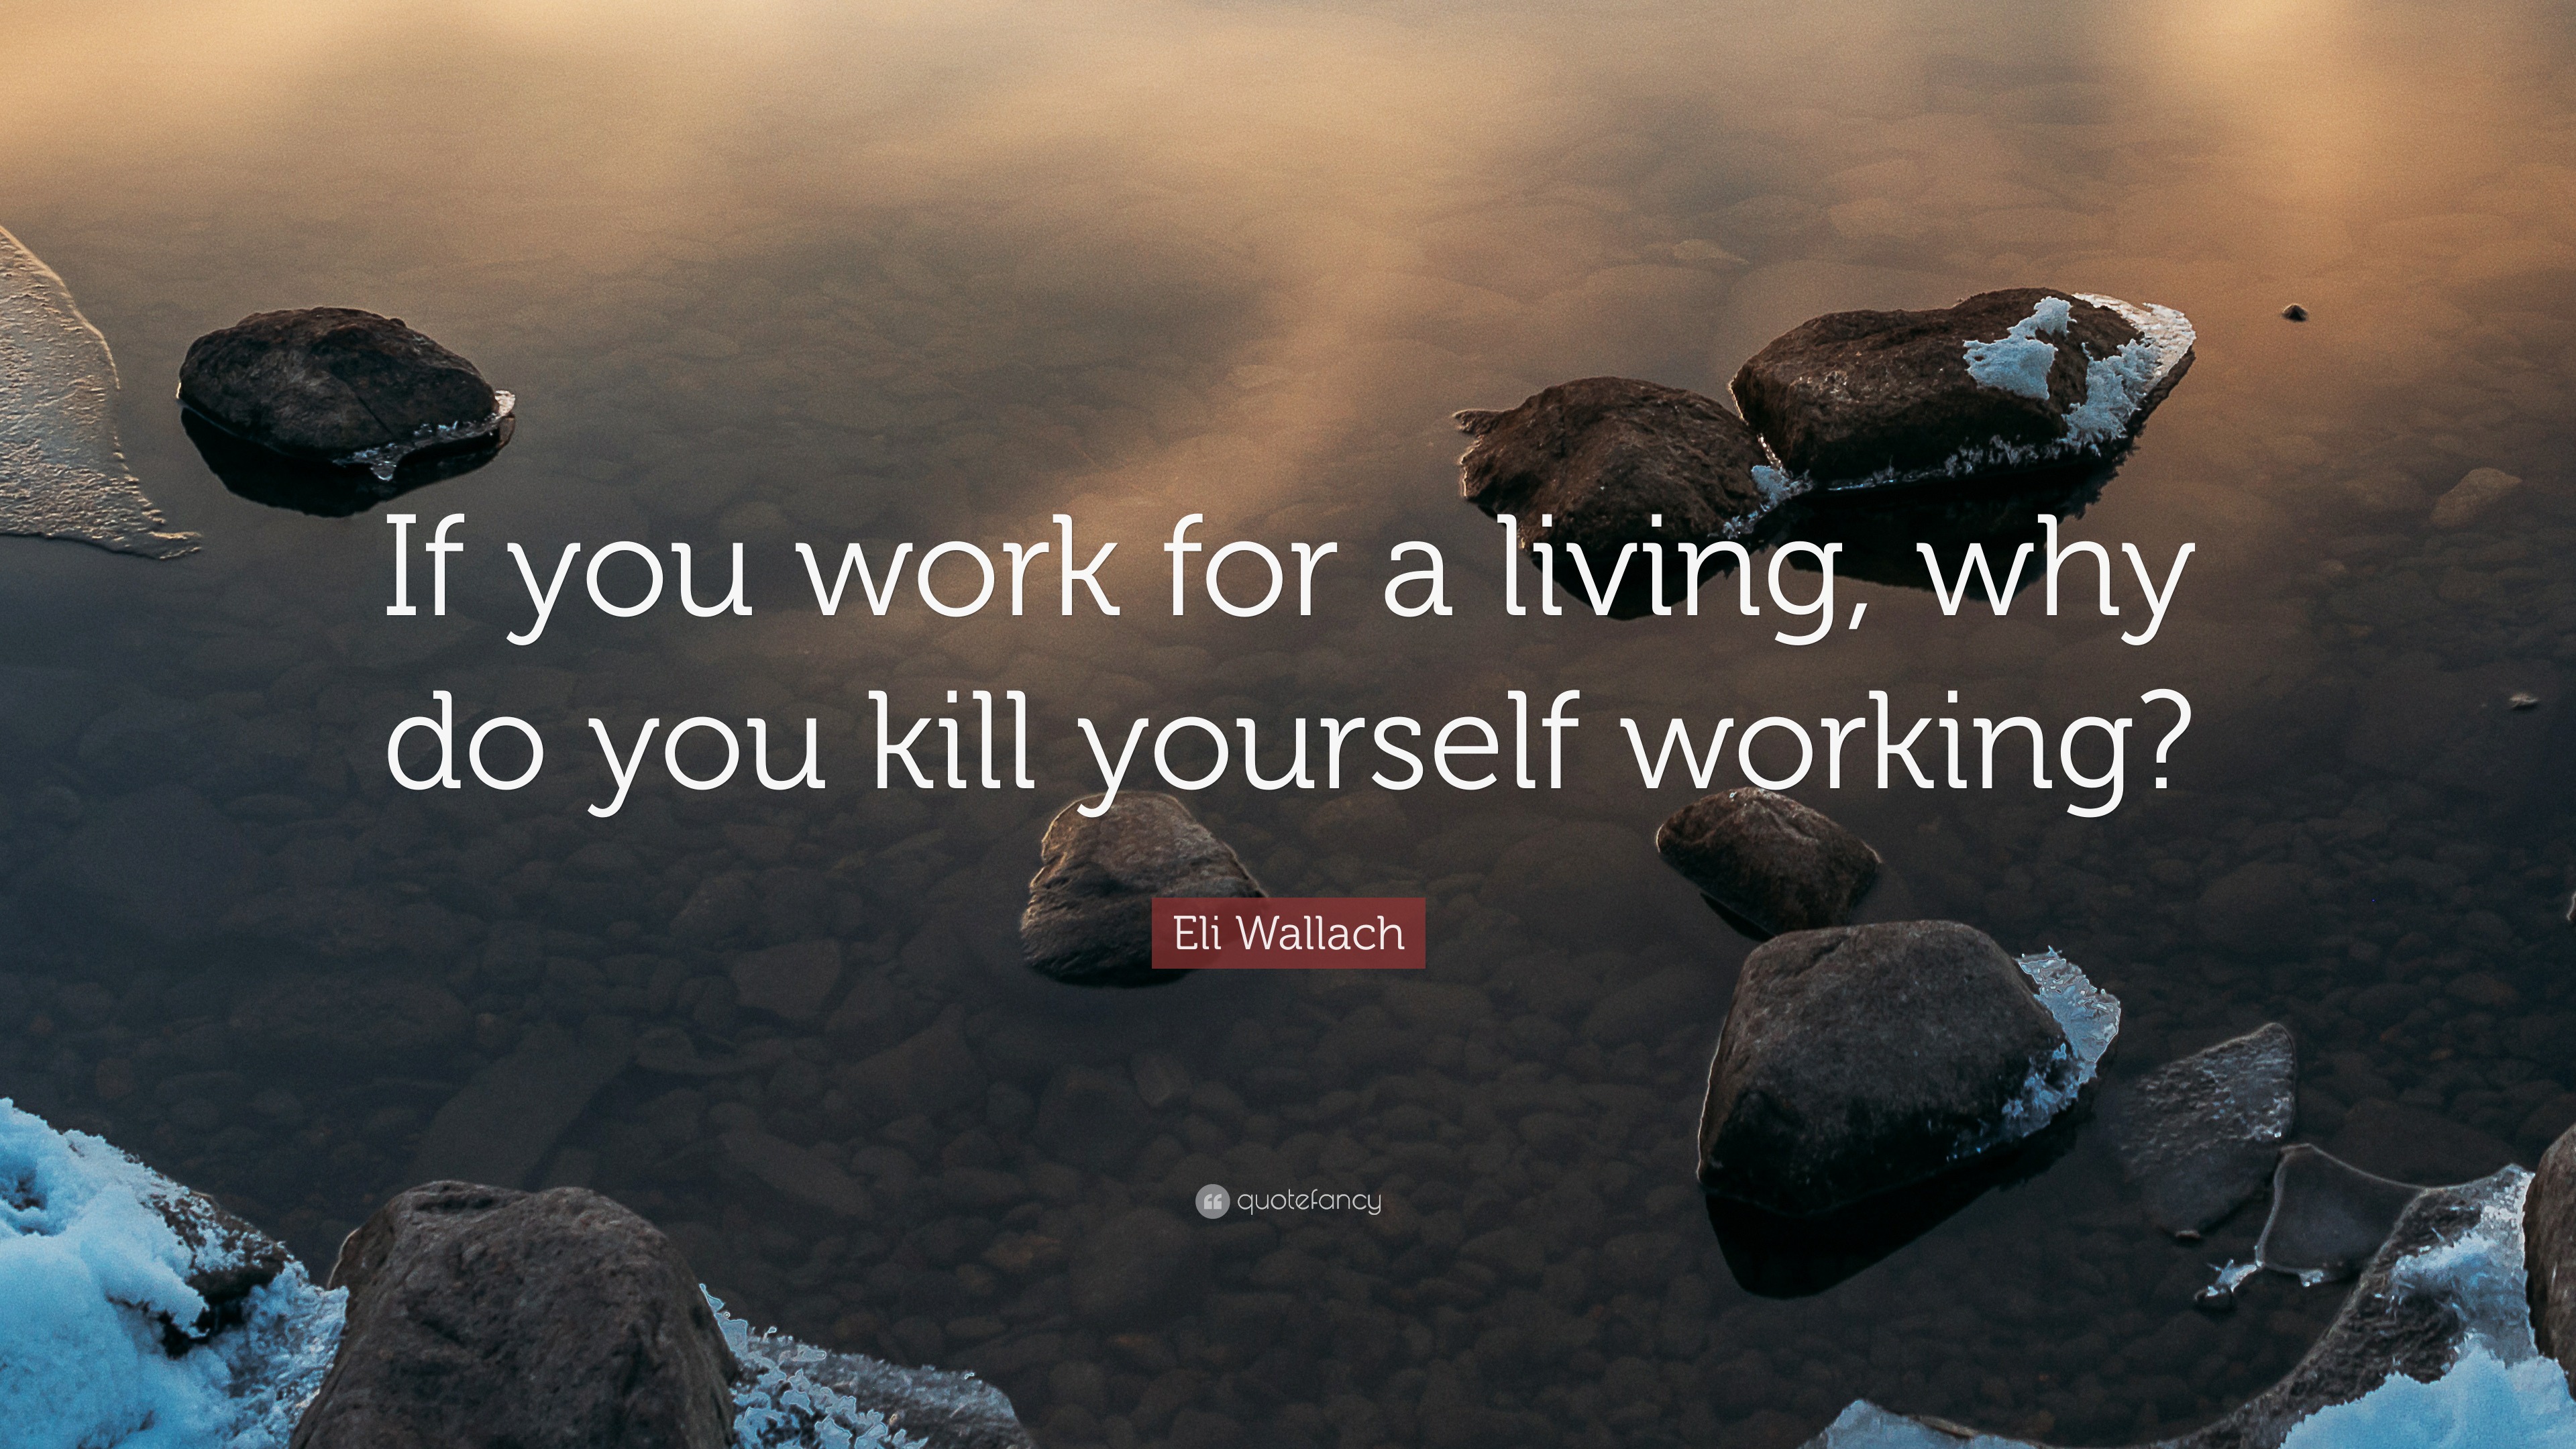 Eli Wallach Quote “if You Work For A Living Why Do You Kill Yourself